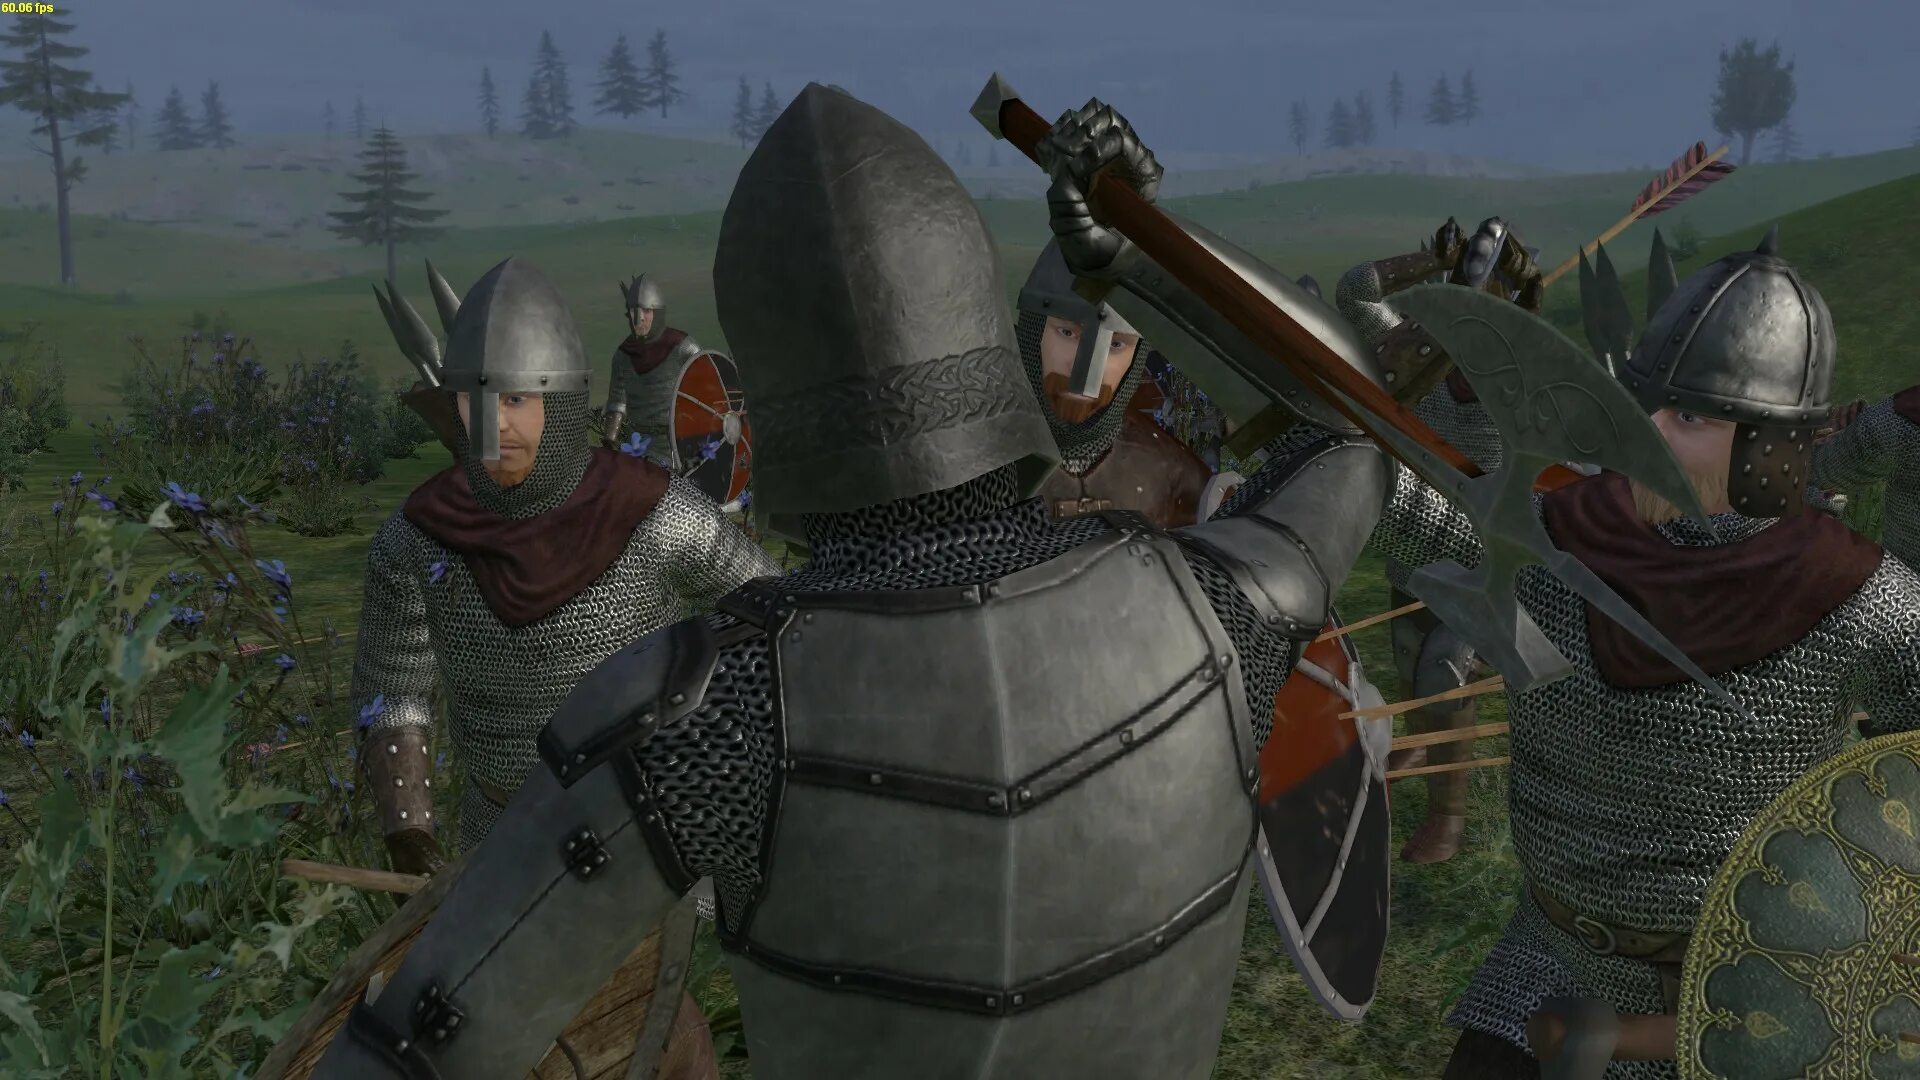 Mount and Blade Bannerlord Prophesy of Pendor. Mount and Blade Prophesy of Pendor 1.011. Mount Blade Bannerlord Prophesy of Pendor 3.8. Маунт энд блейд 18 век.